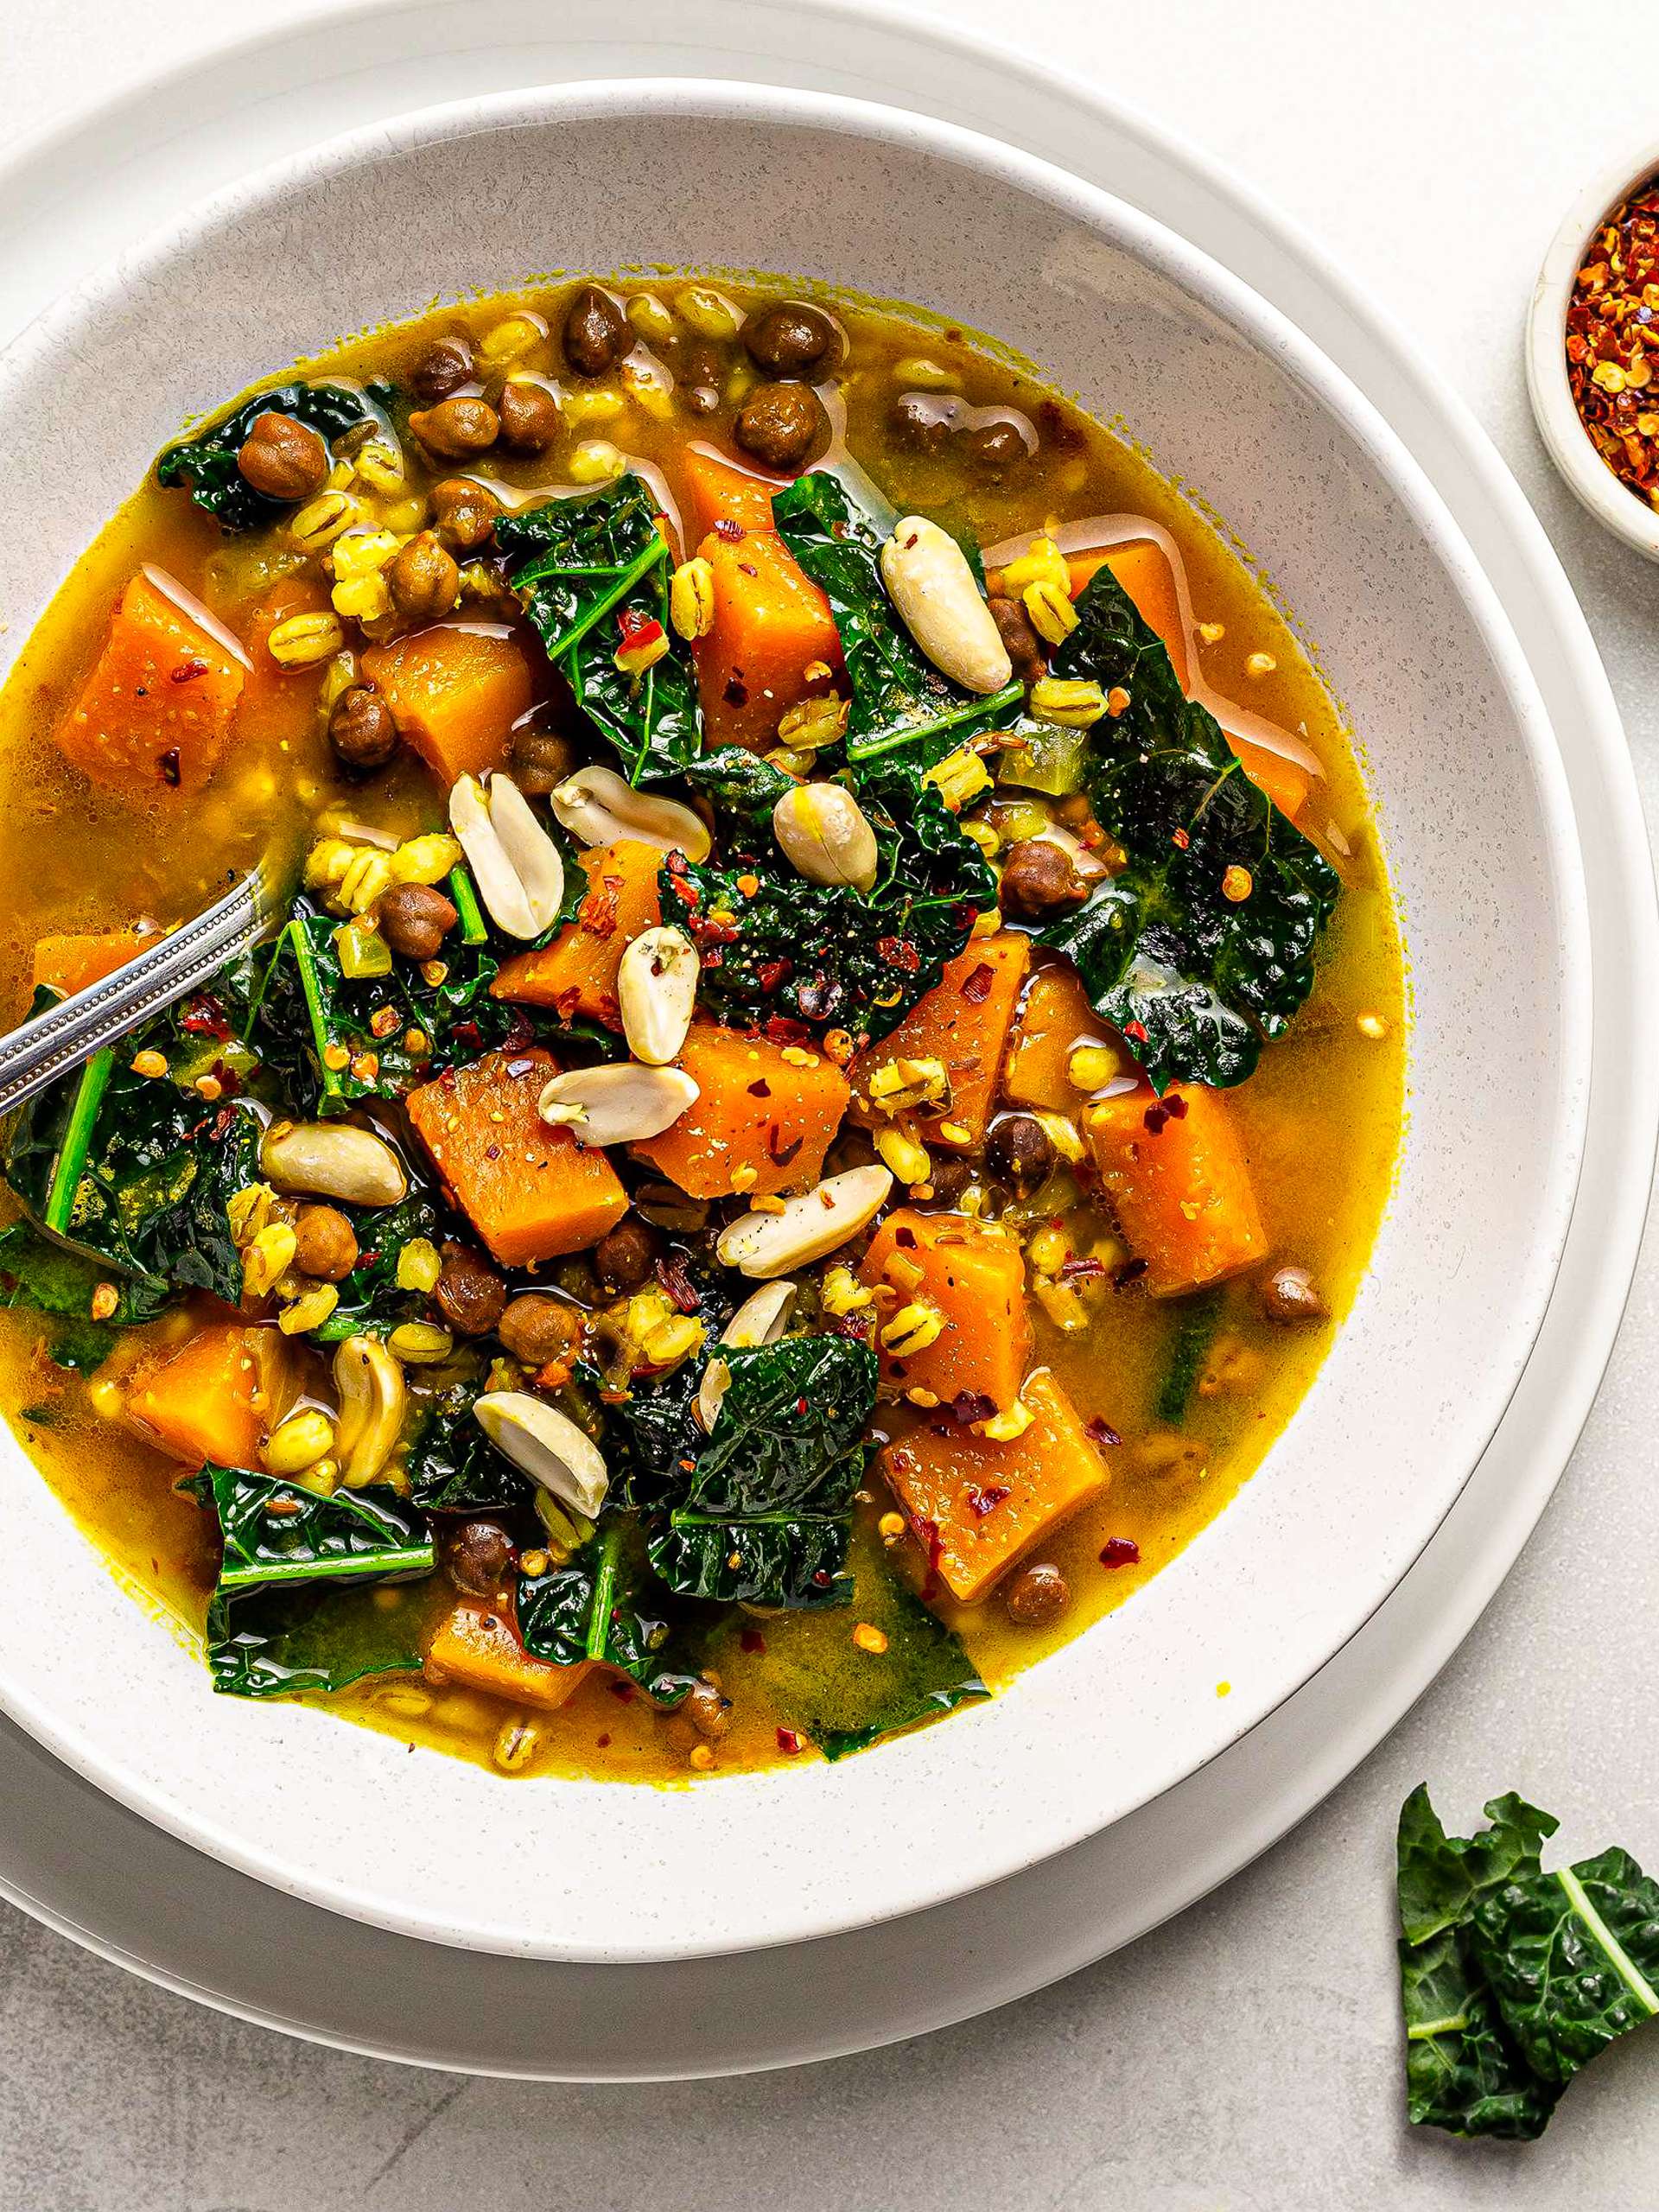 10 Healthy Autumn Recipes on a Budget